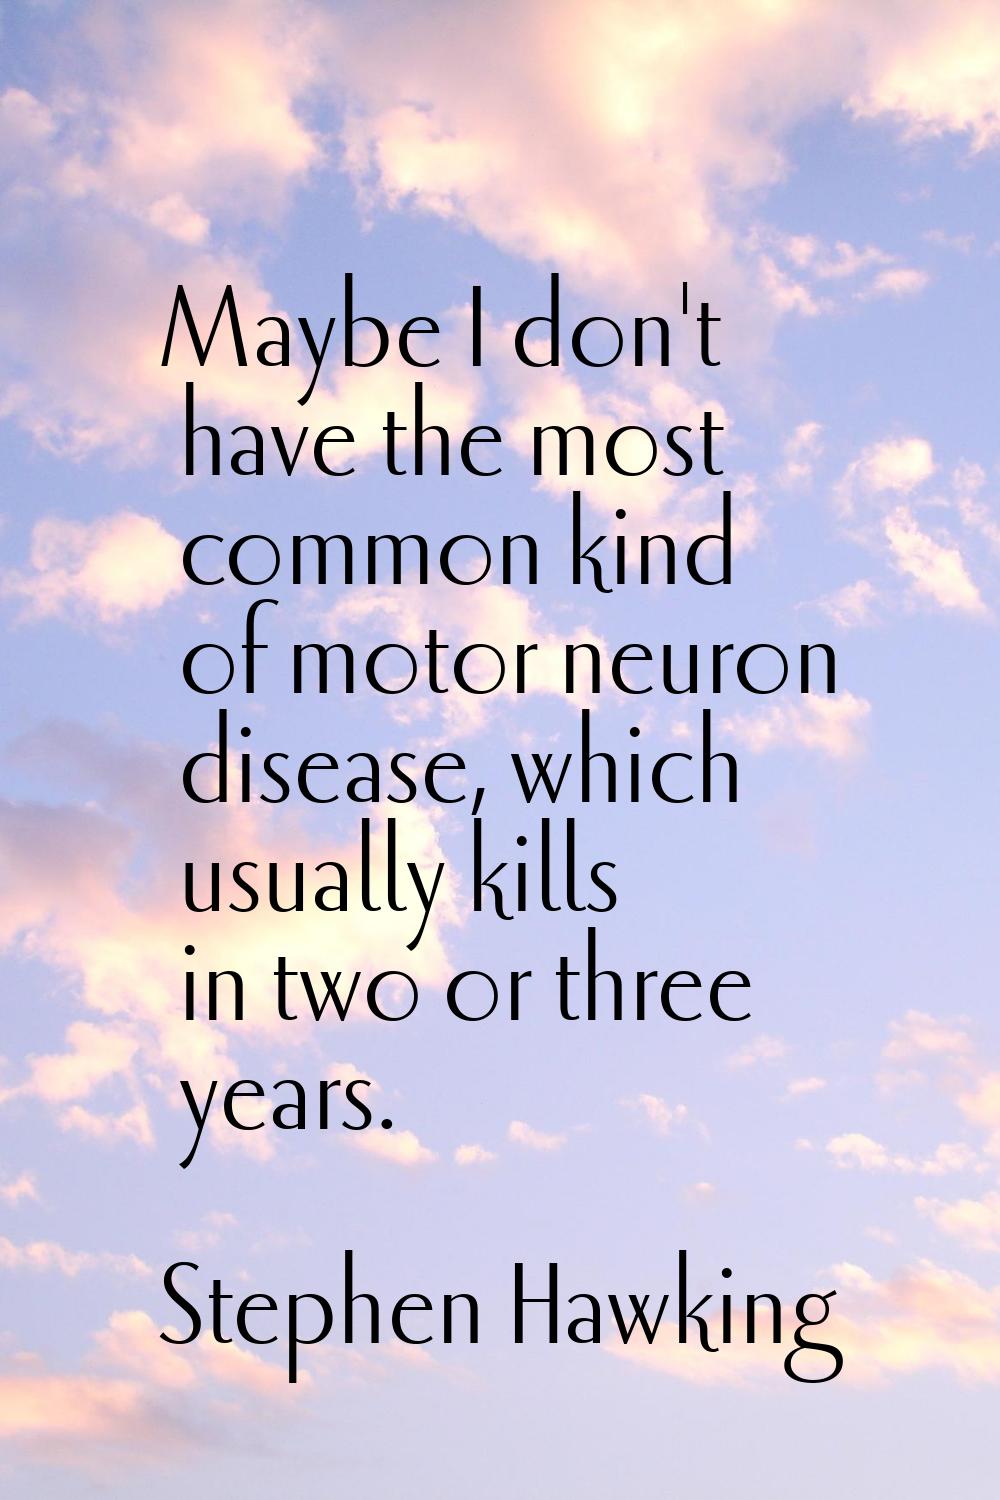 Maybe I don't have the most common kind of motor neuron disease, which usually kills in two or thre